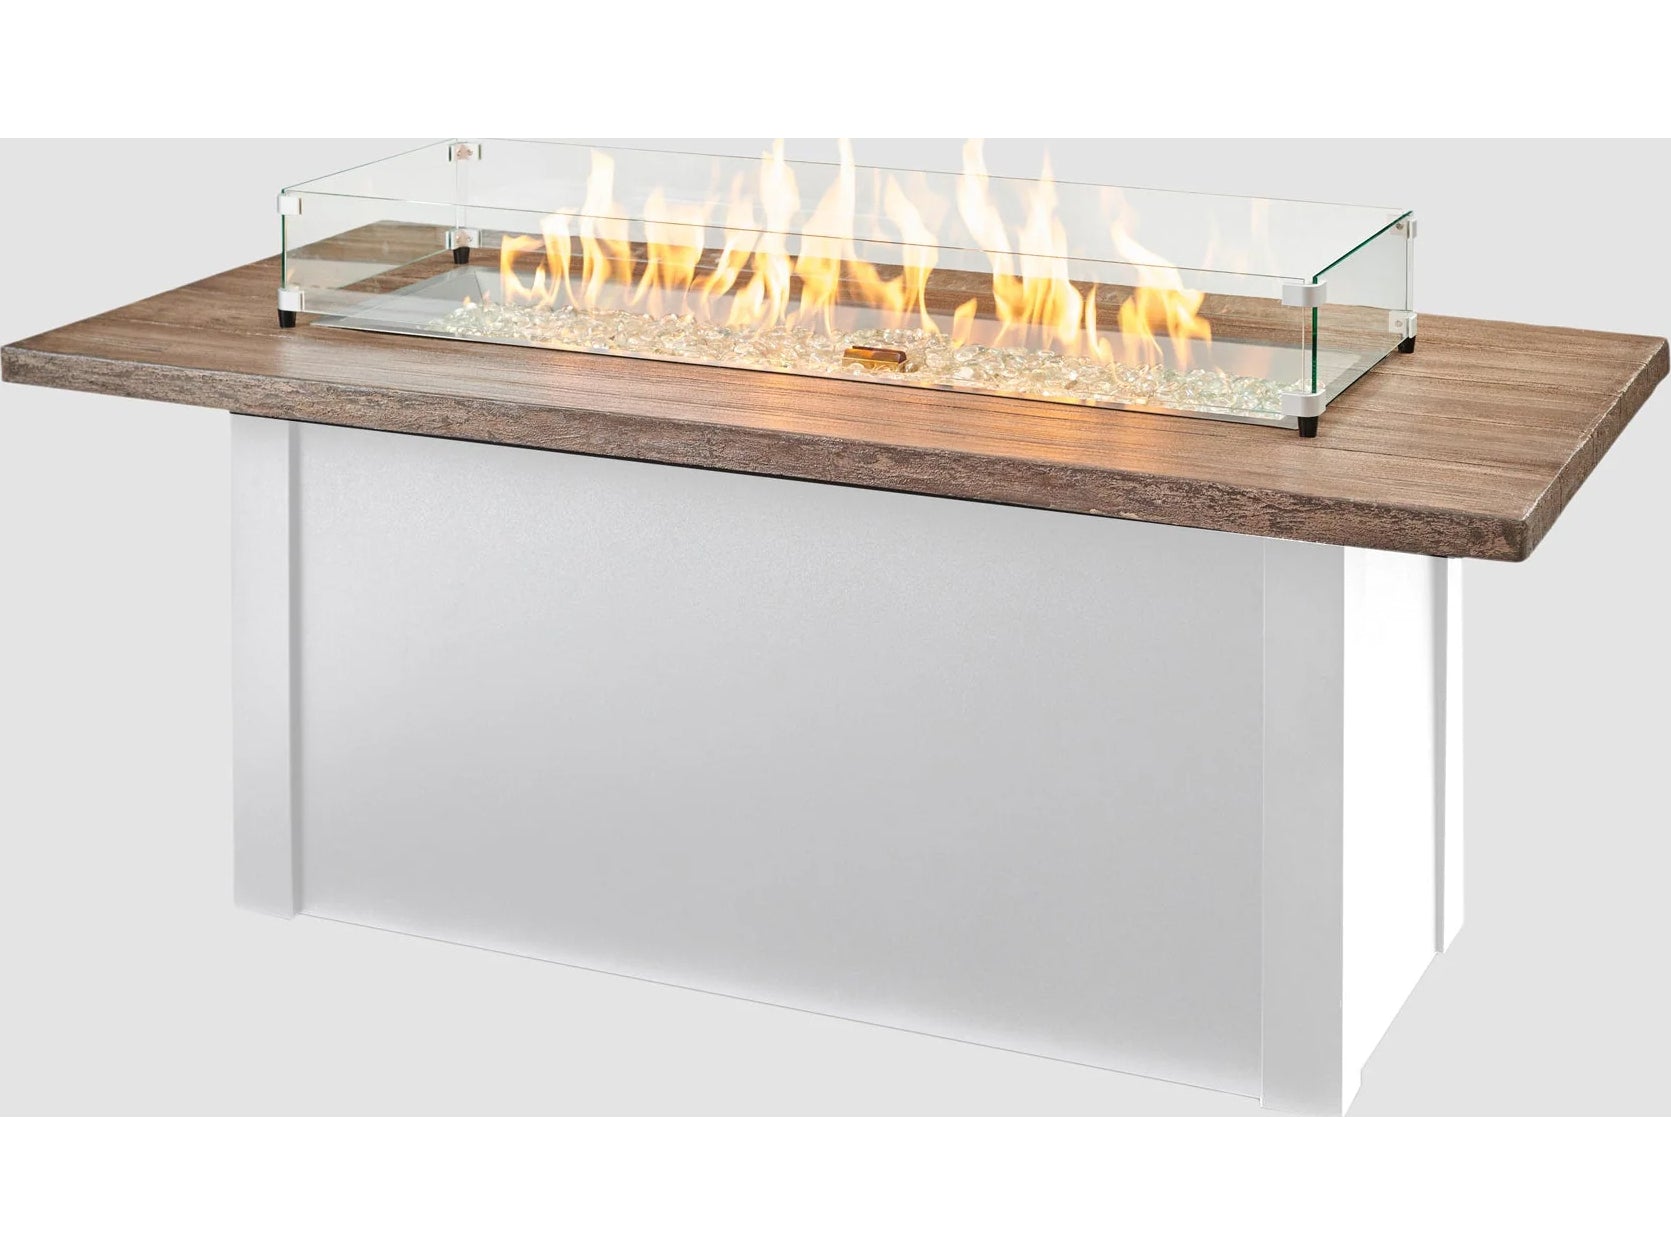 Outdoor Greatroom - 62’‘W x 30’'D - Havenwood Steel White Rectangular Driftwood Everblend Top Gas Fire Pit Table - Direct Spark Ignition